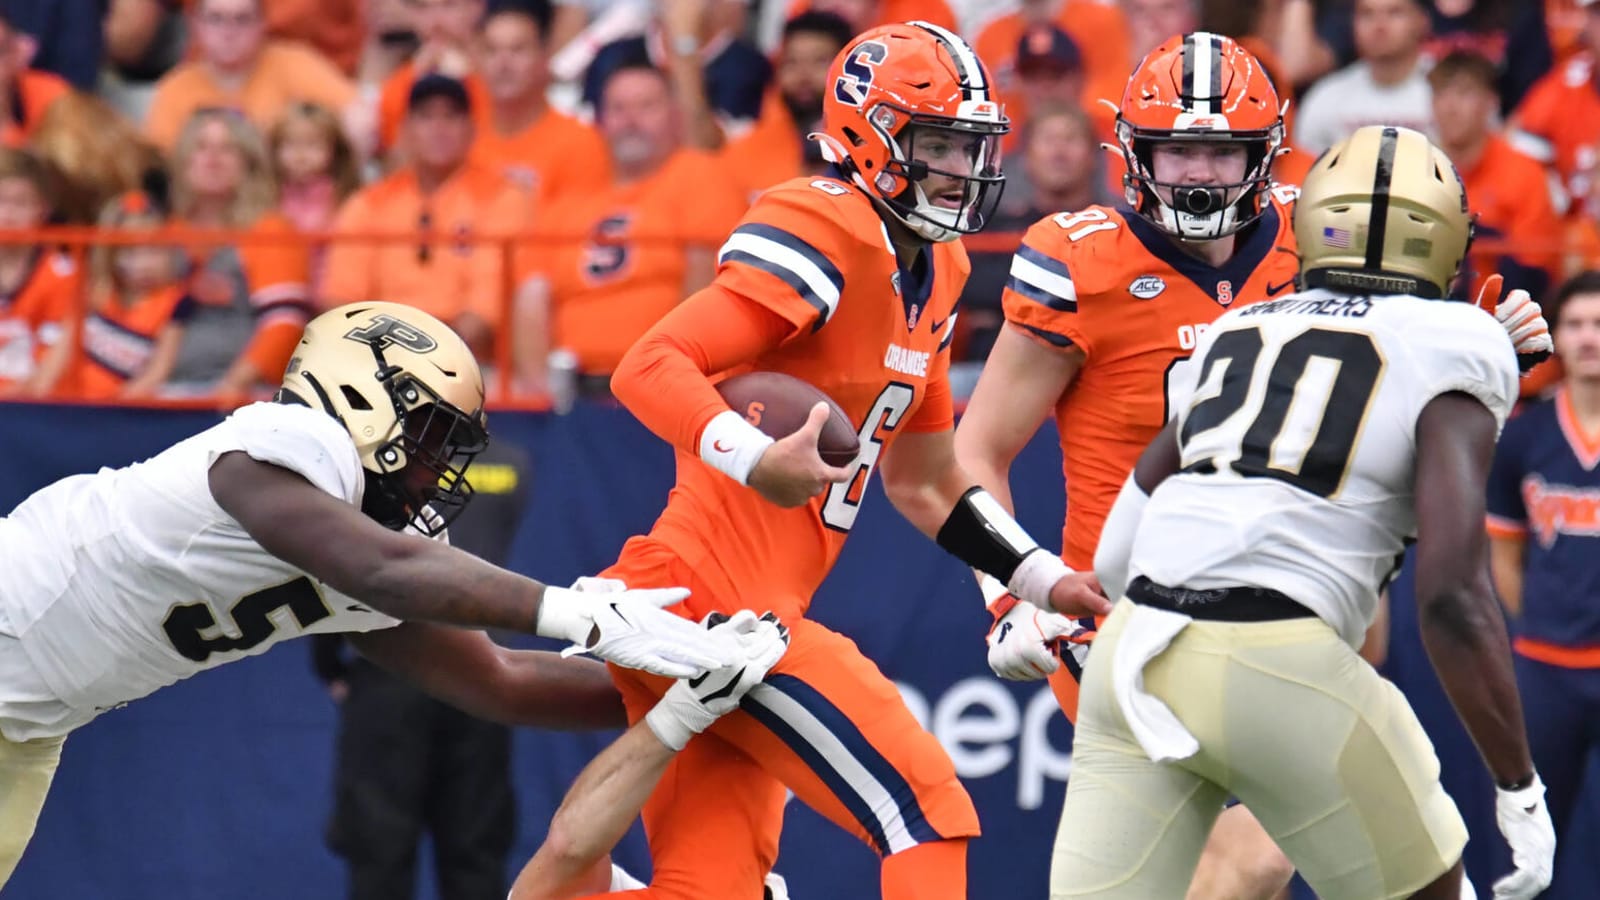 Watch: Purdue's meltdown leads to beautiful game-winning TD by Syracuse